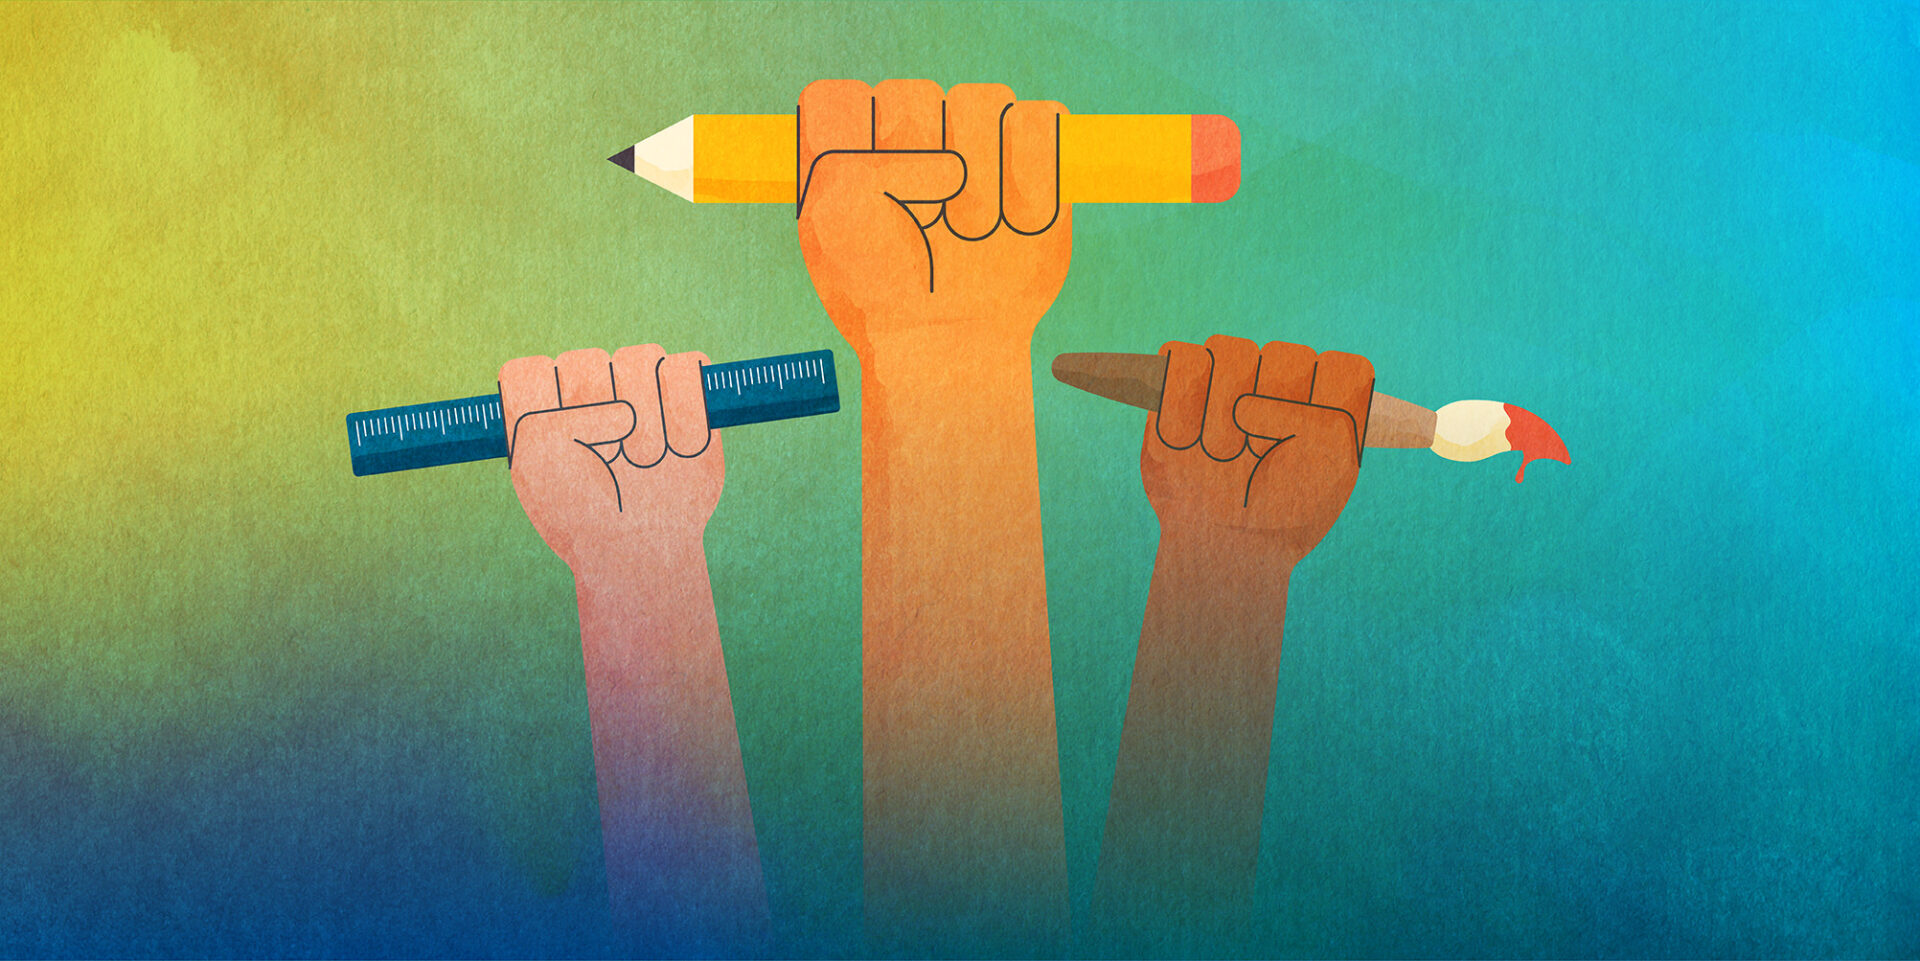 An illustration of three hands raised in the air. One is holding a ruler, the other a pencil, and the third a paintbrush.